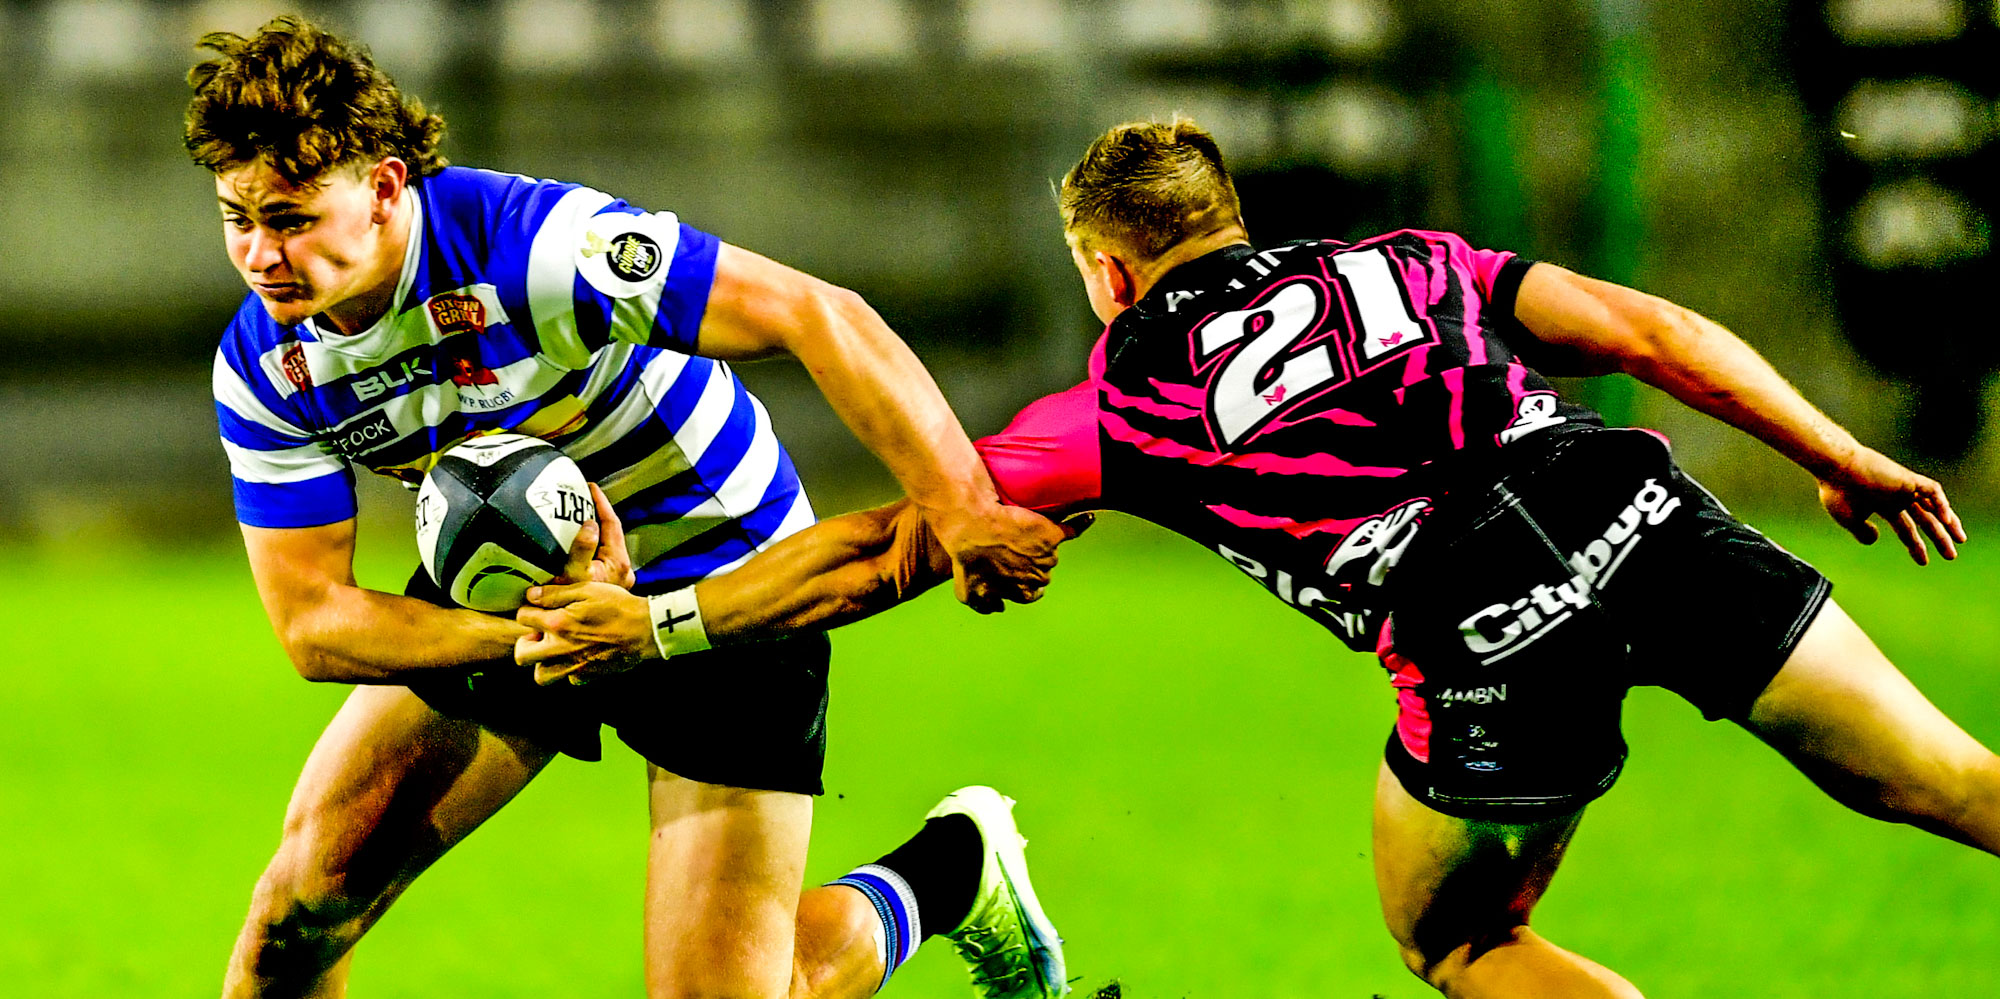 Thomas Nel of DHL WP tries to evade a tackle in their match against the Airlink Pumas.